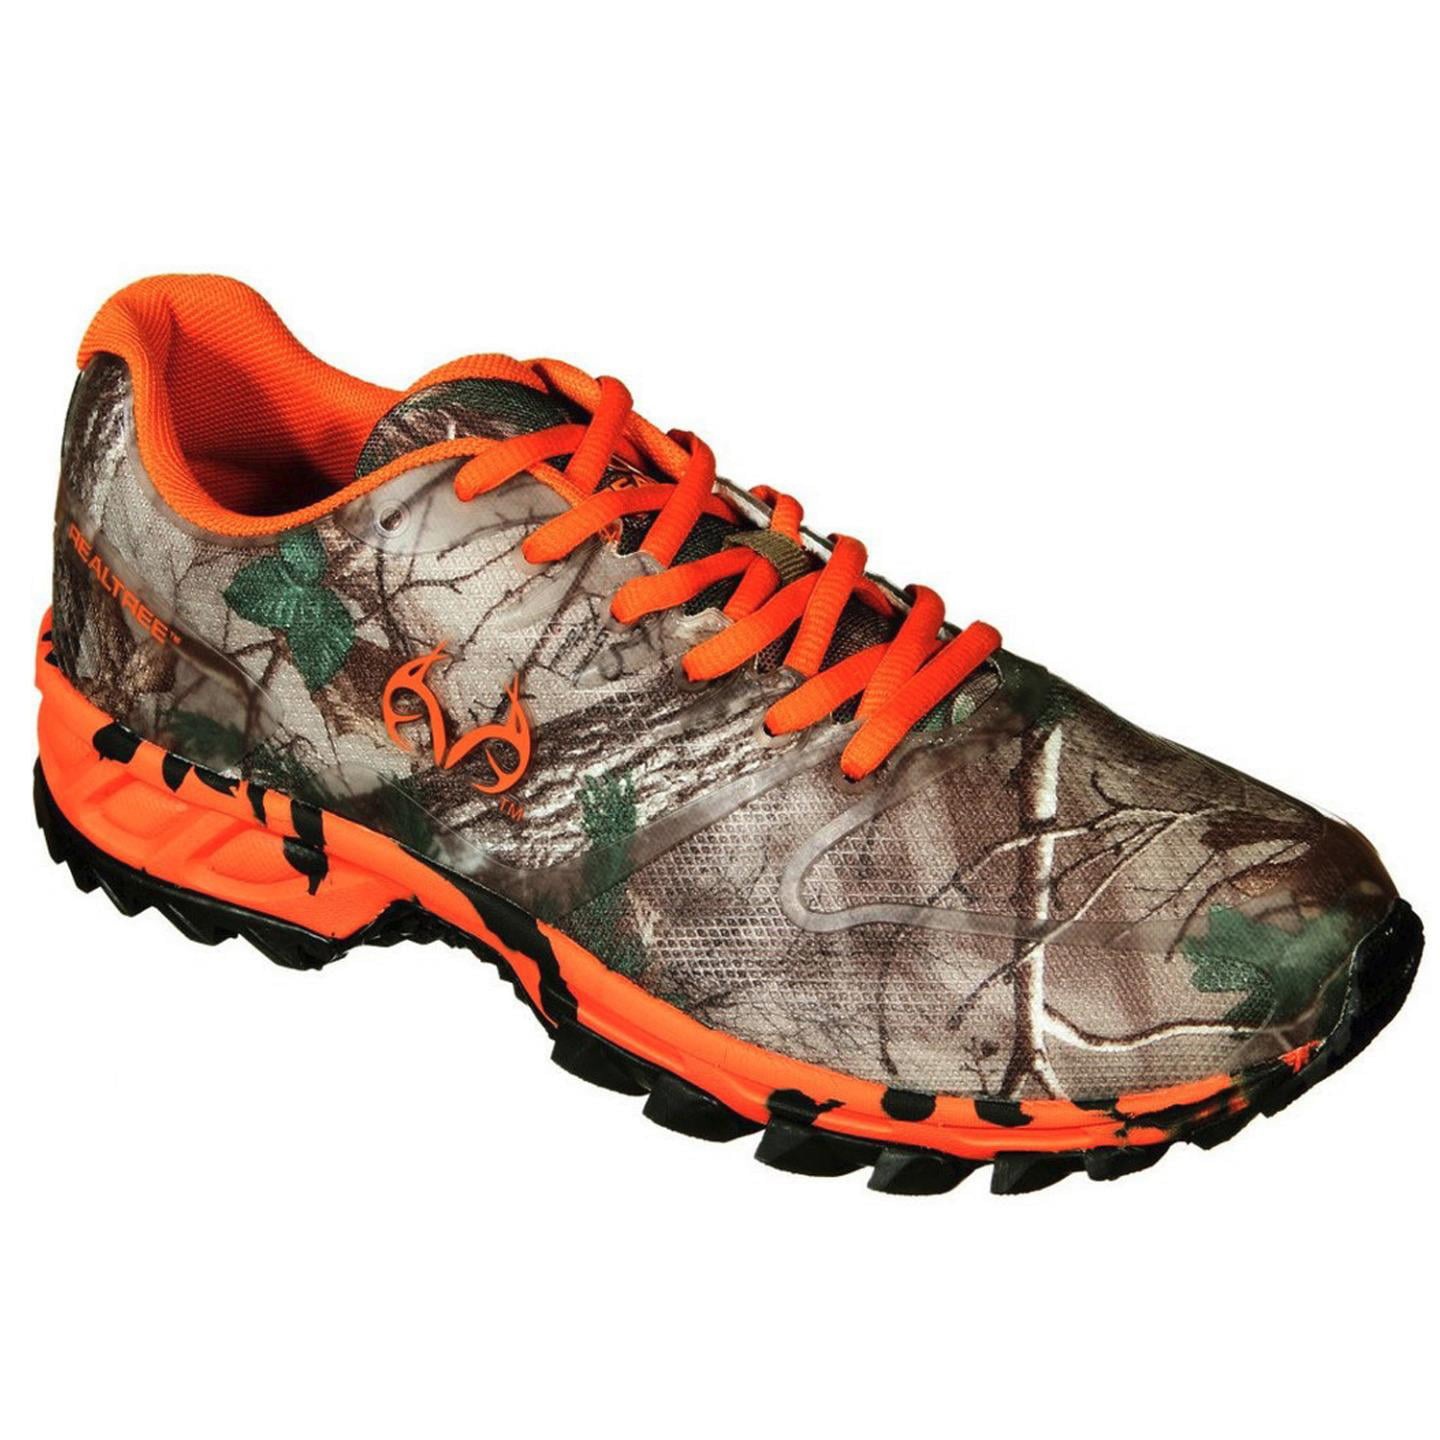 realtree-realtree-outfitters-men-s-cobra-hiking-shoes-camo-orange-8